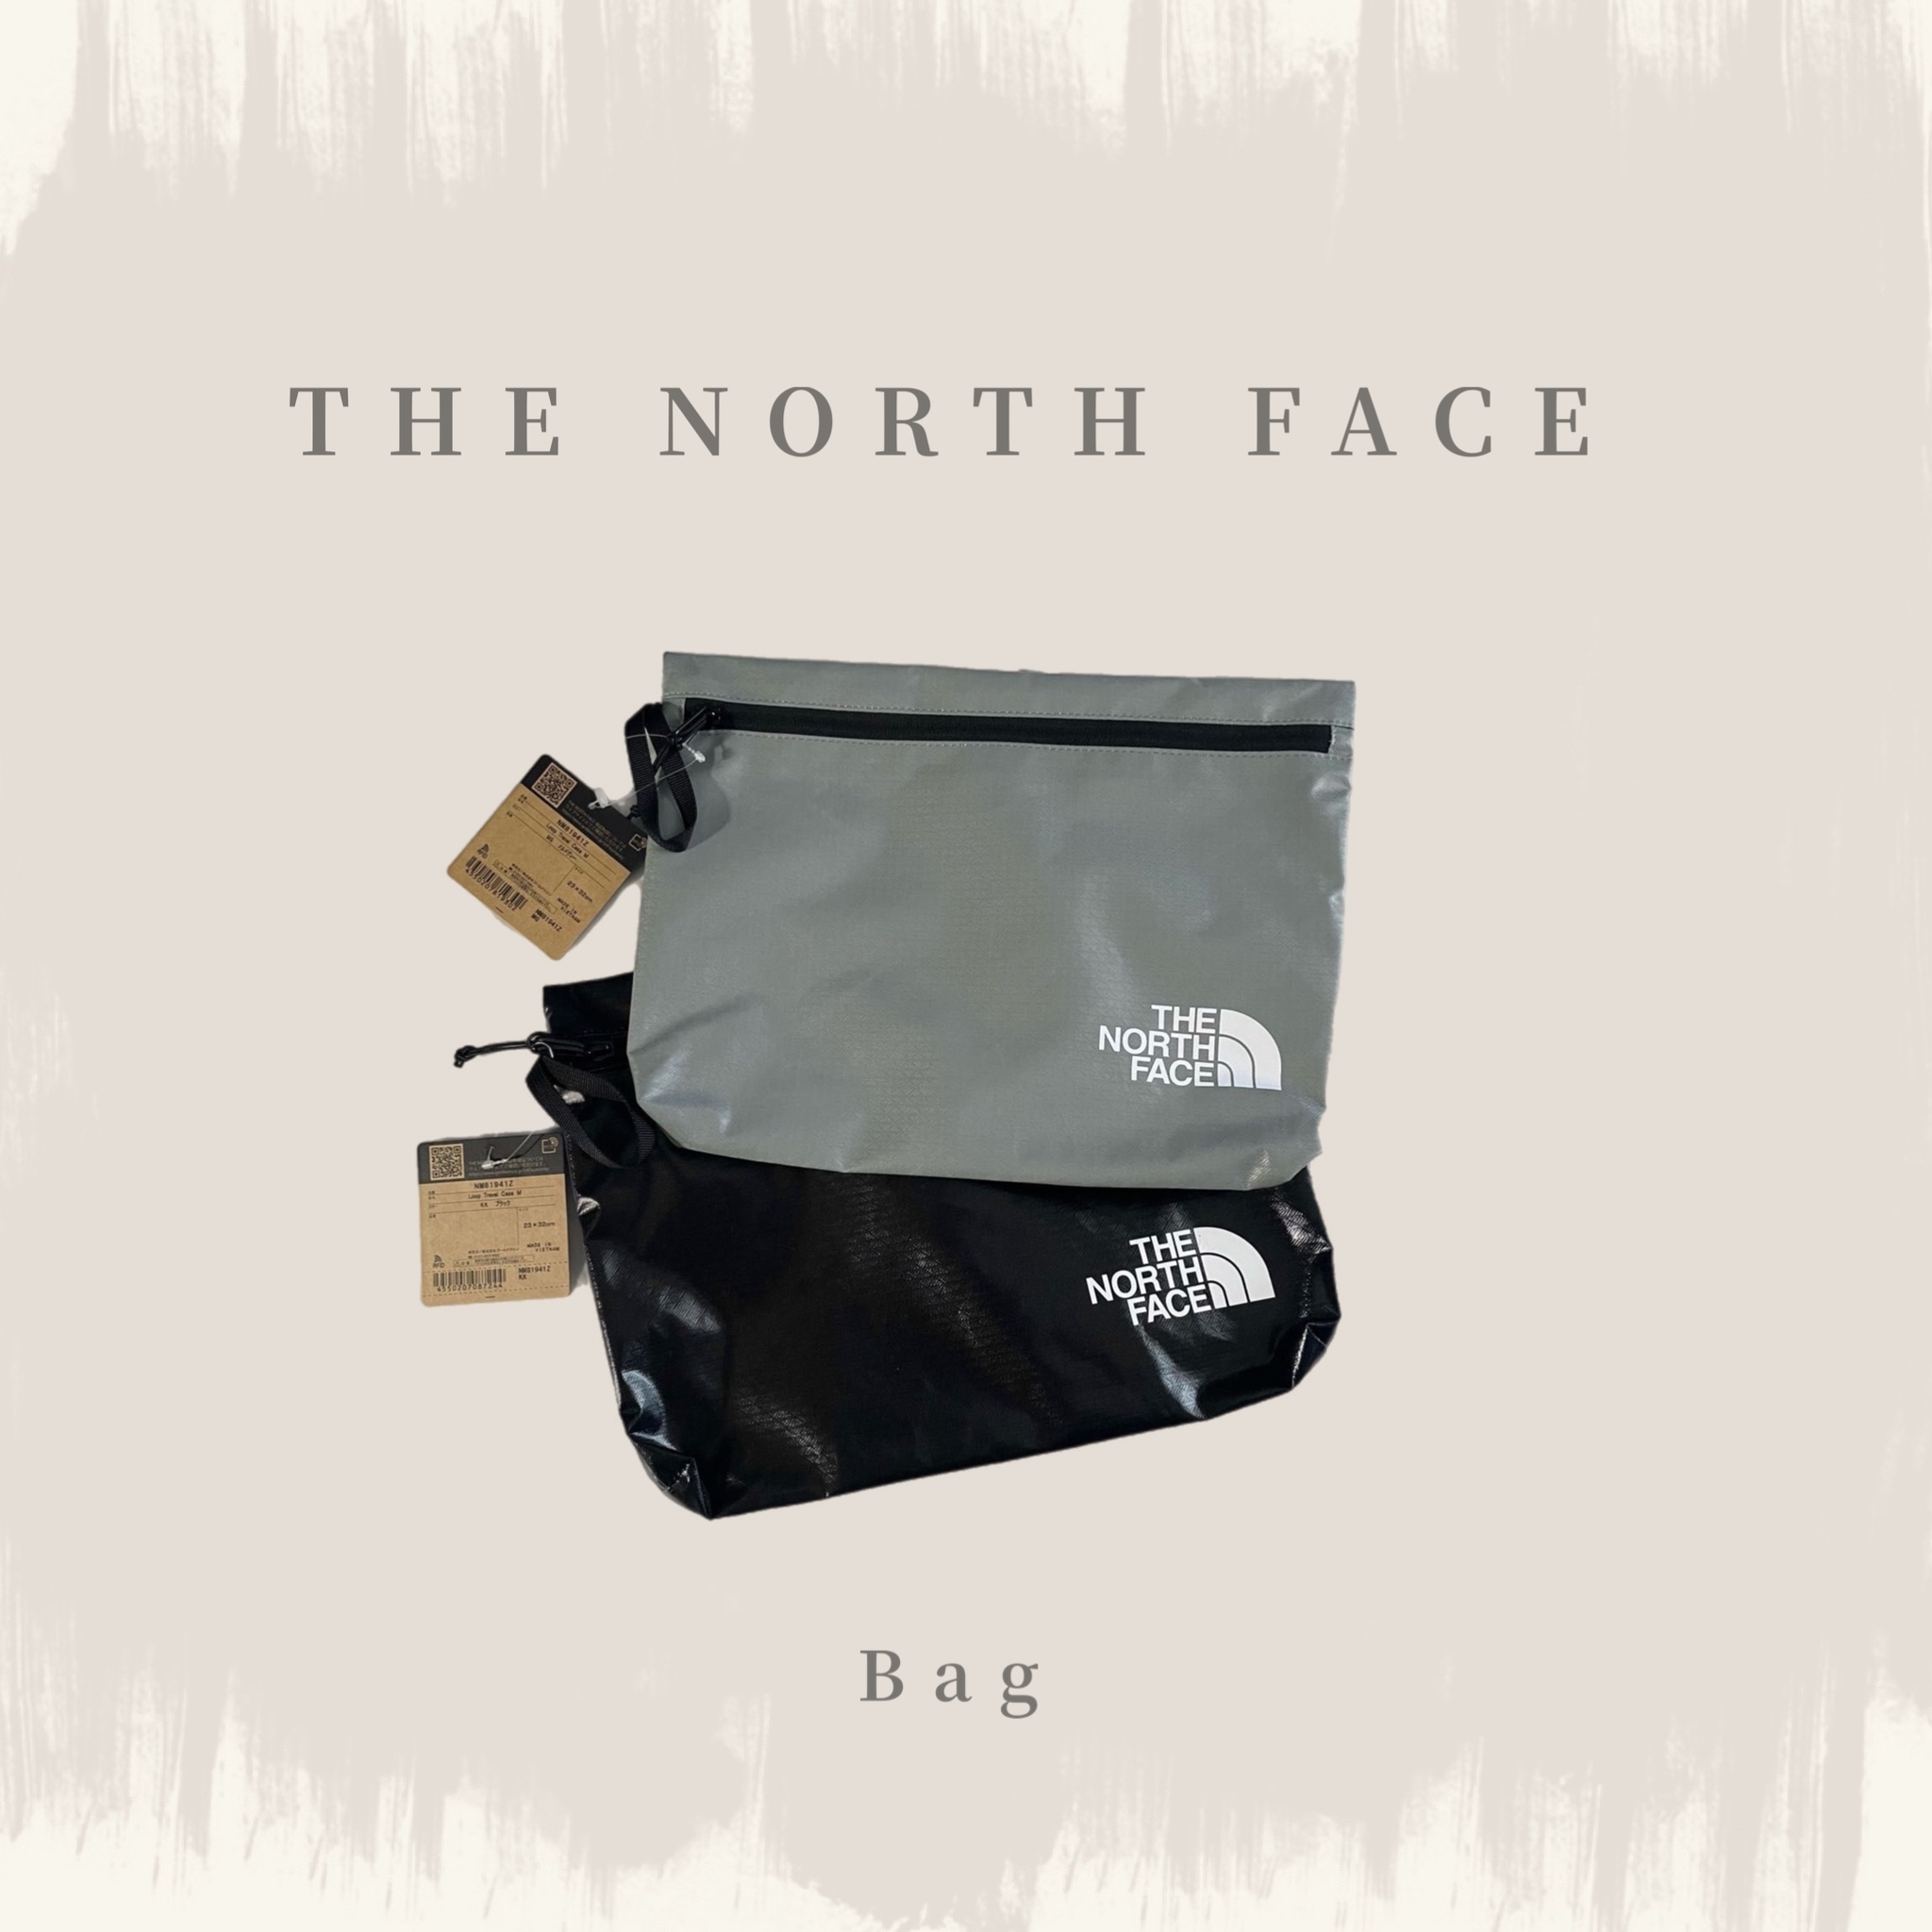 THE NORTH FACE 防水拉鍊小包黑//泥灰NM81943Z